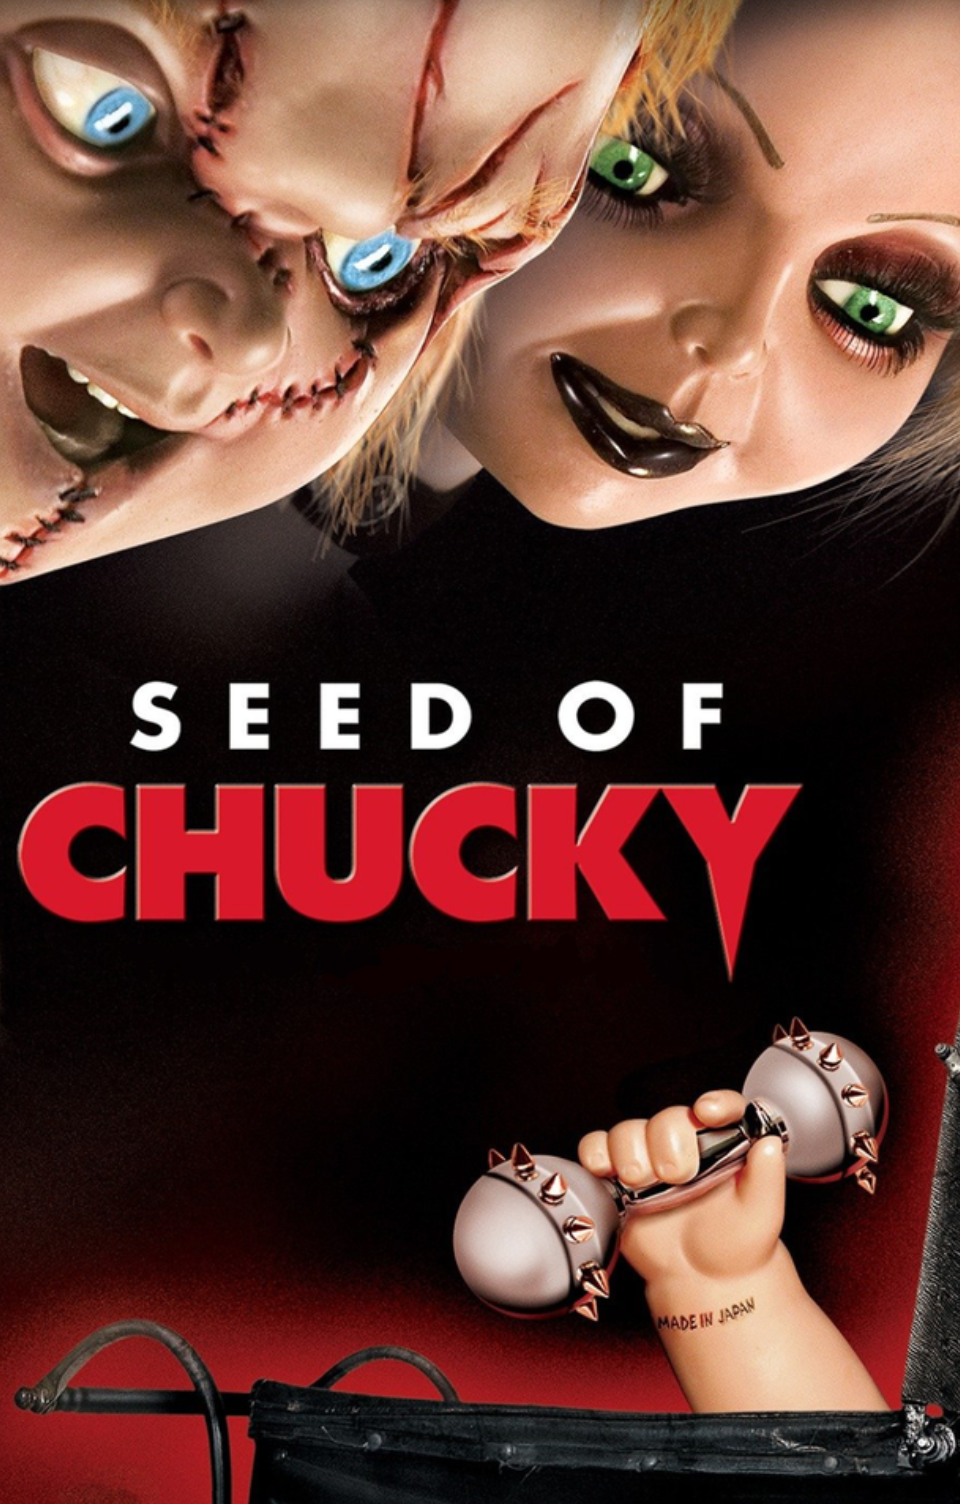 Seed_of_chucky